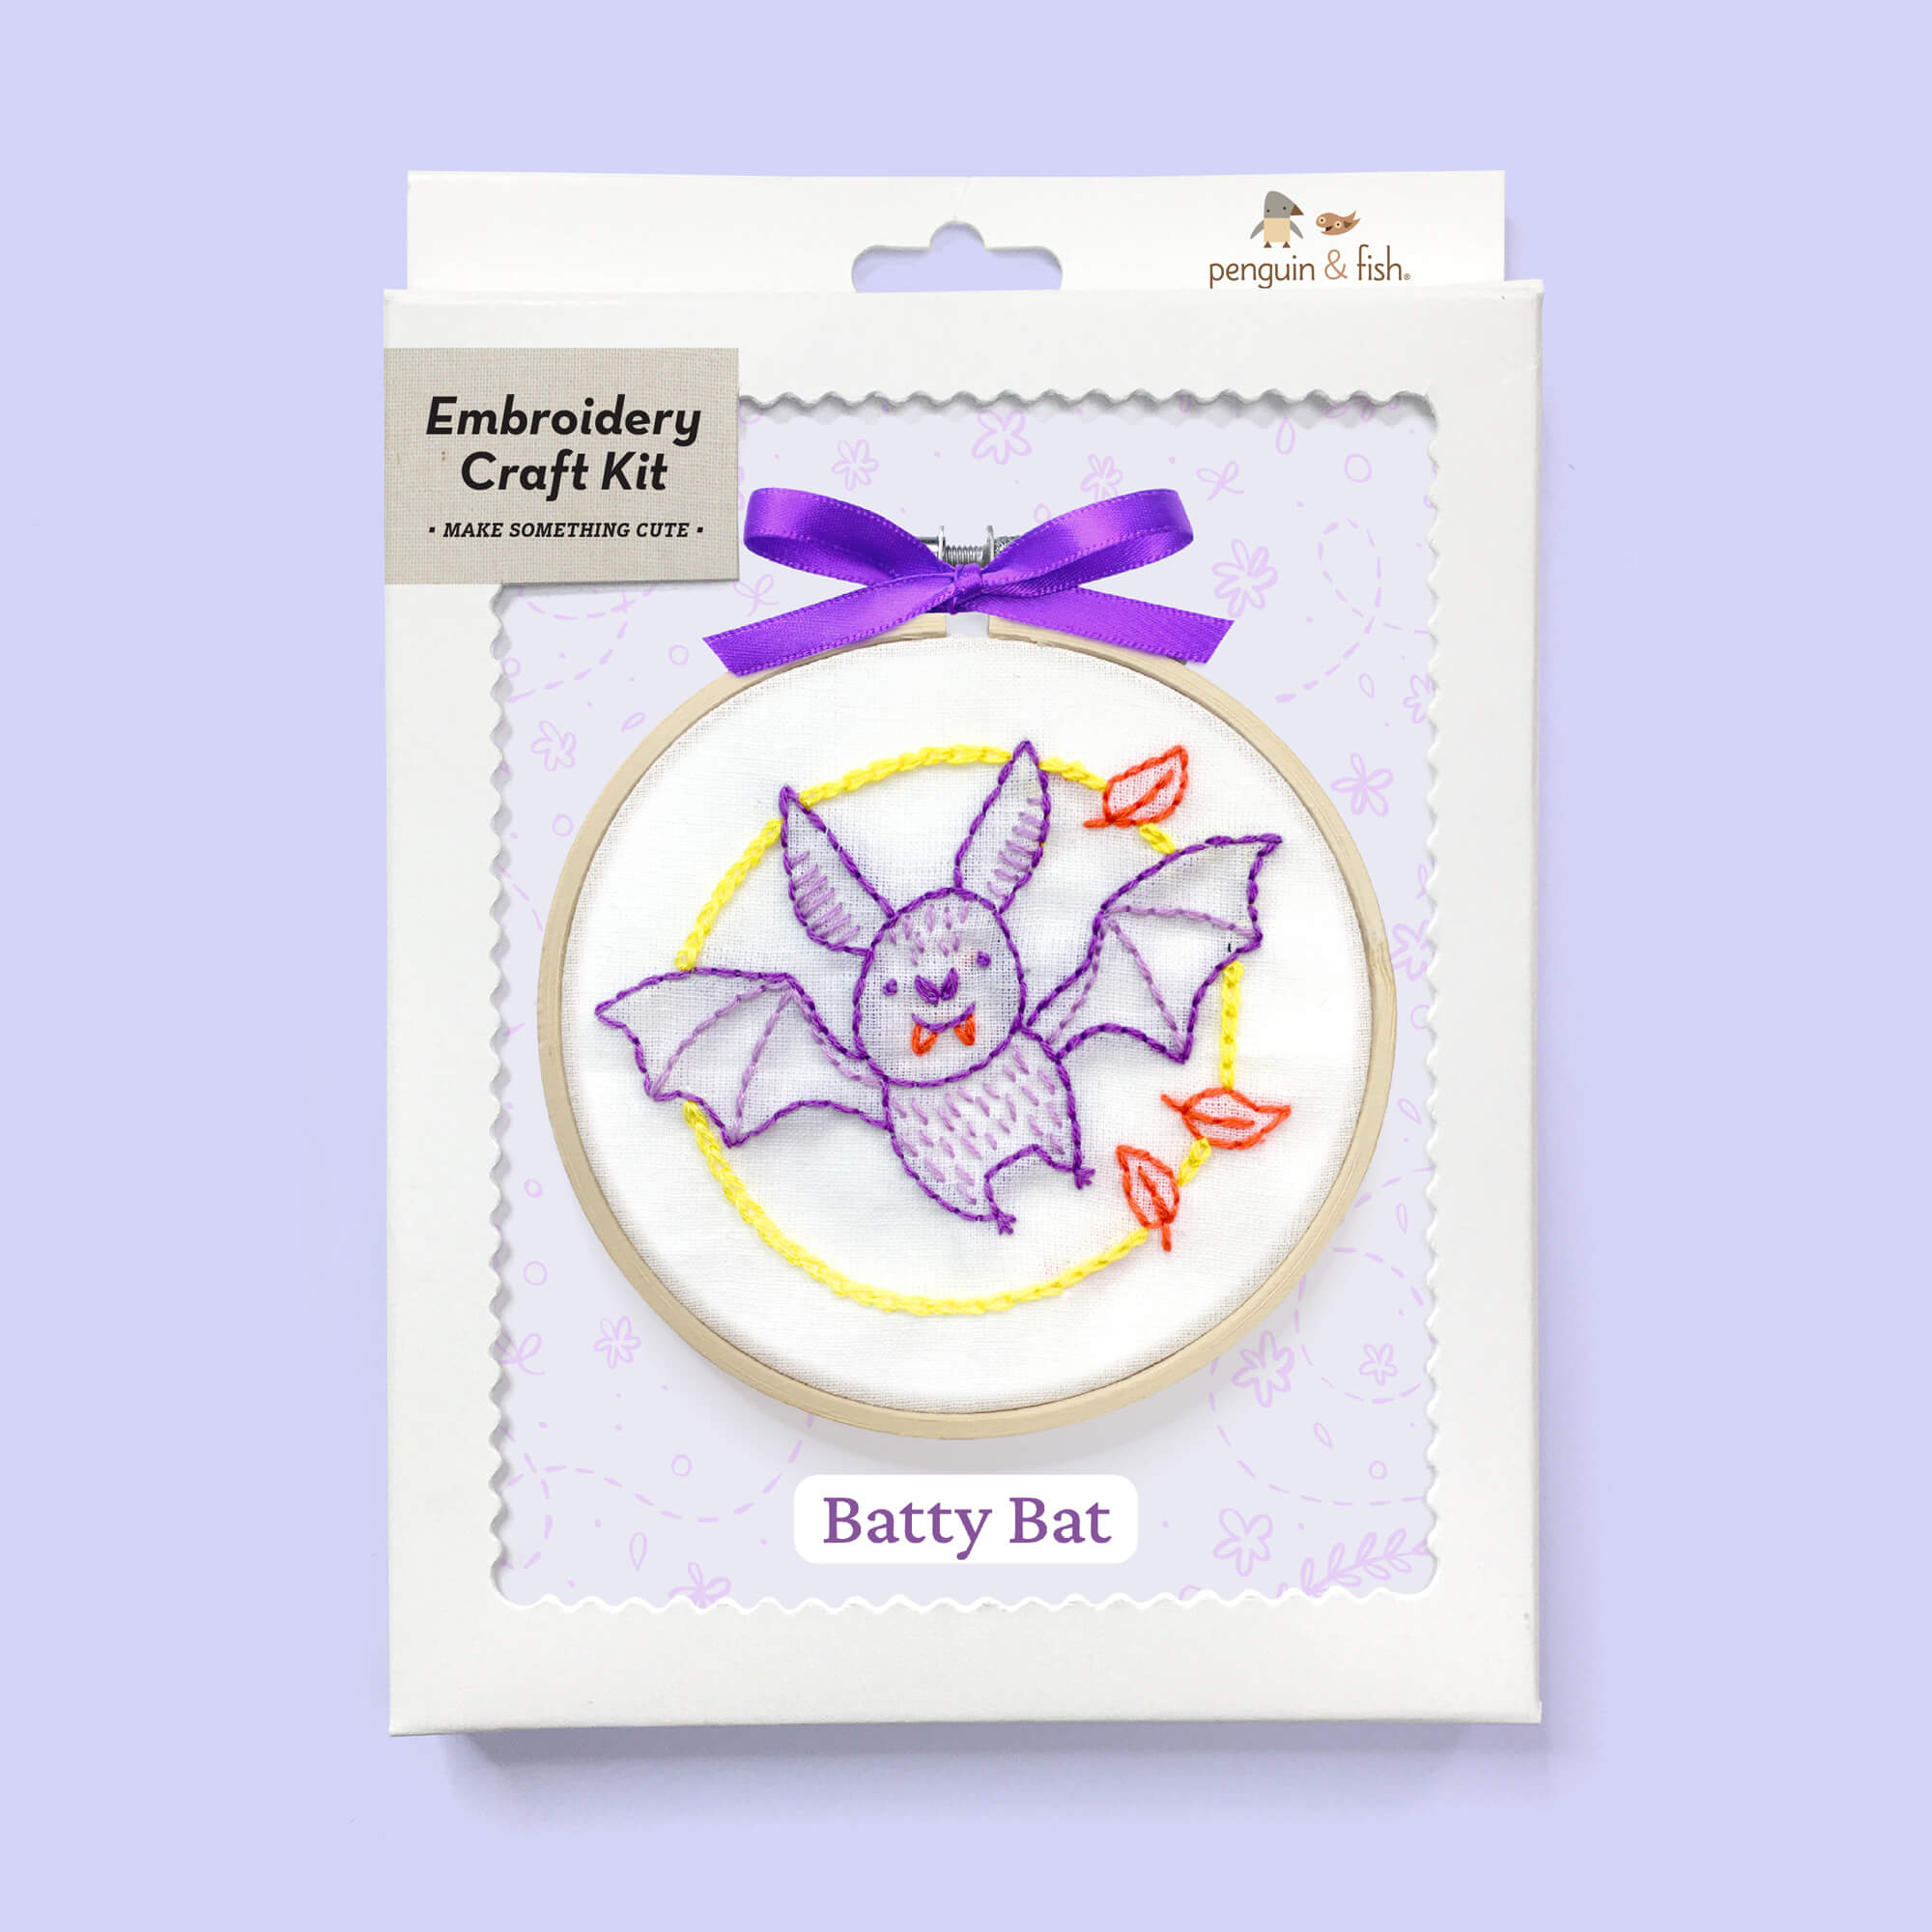 Batty Bat embroidery kit box with supplies